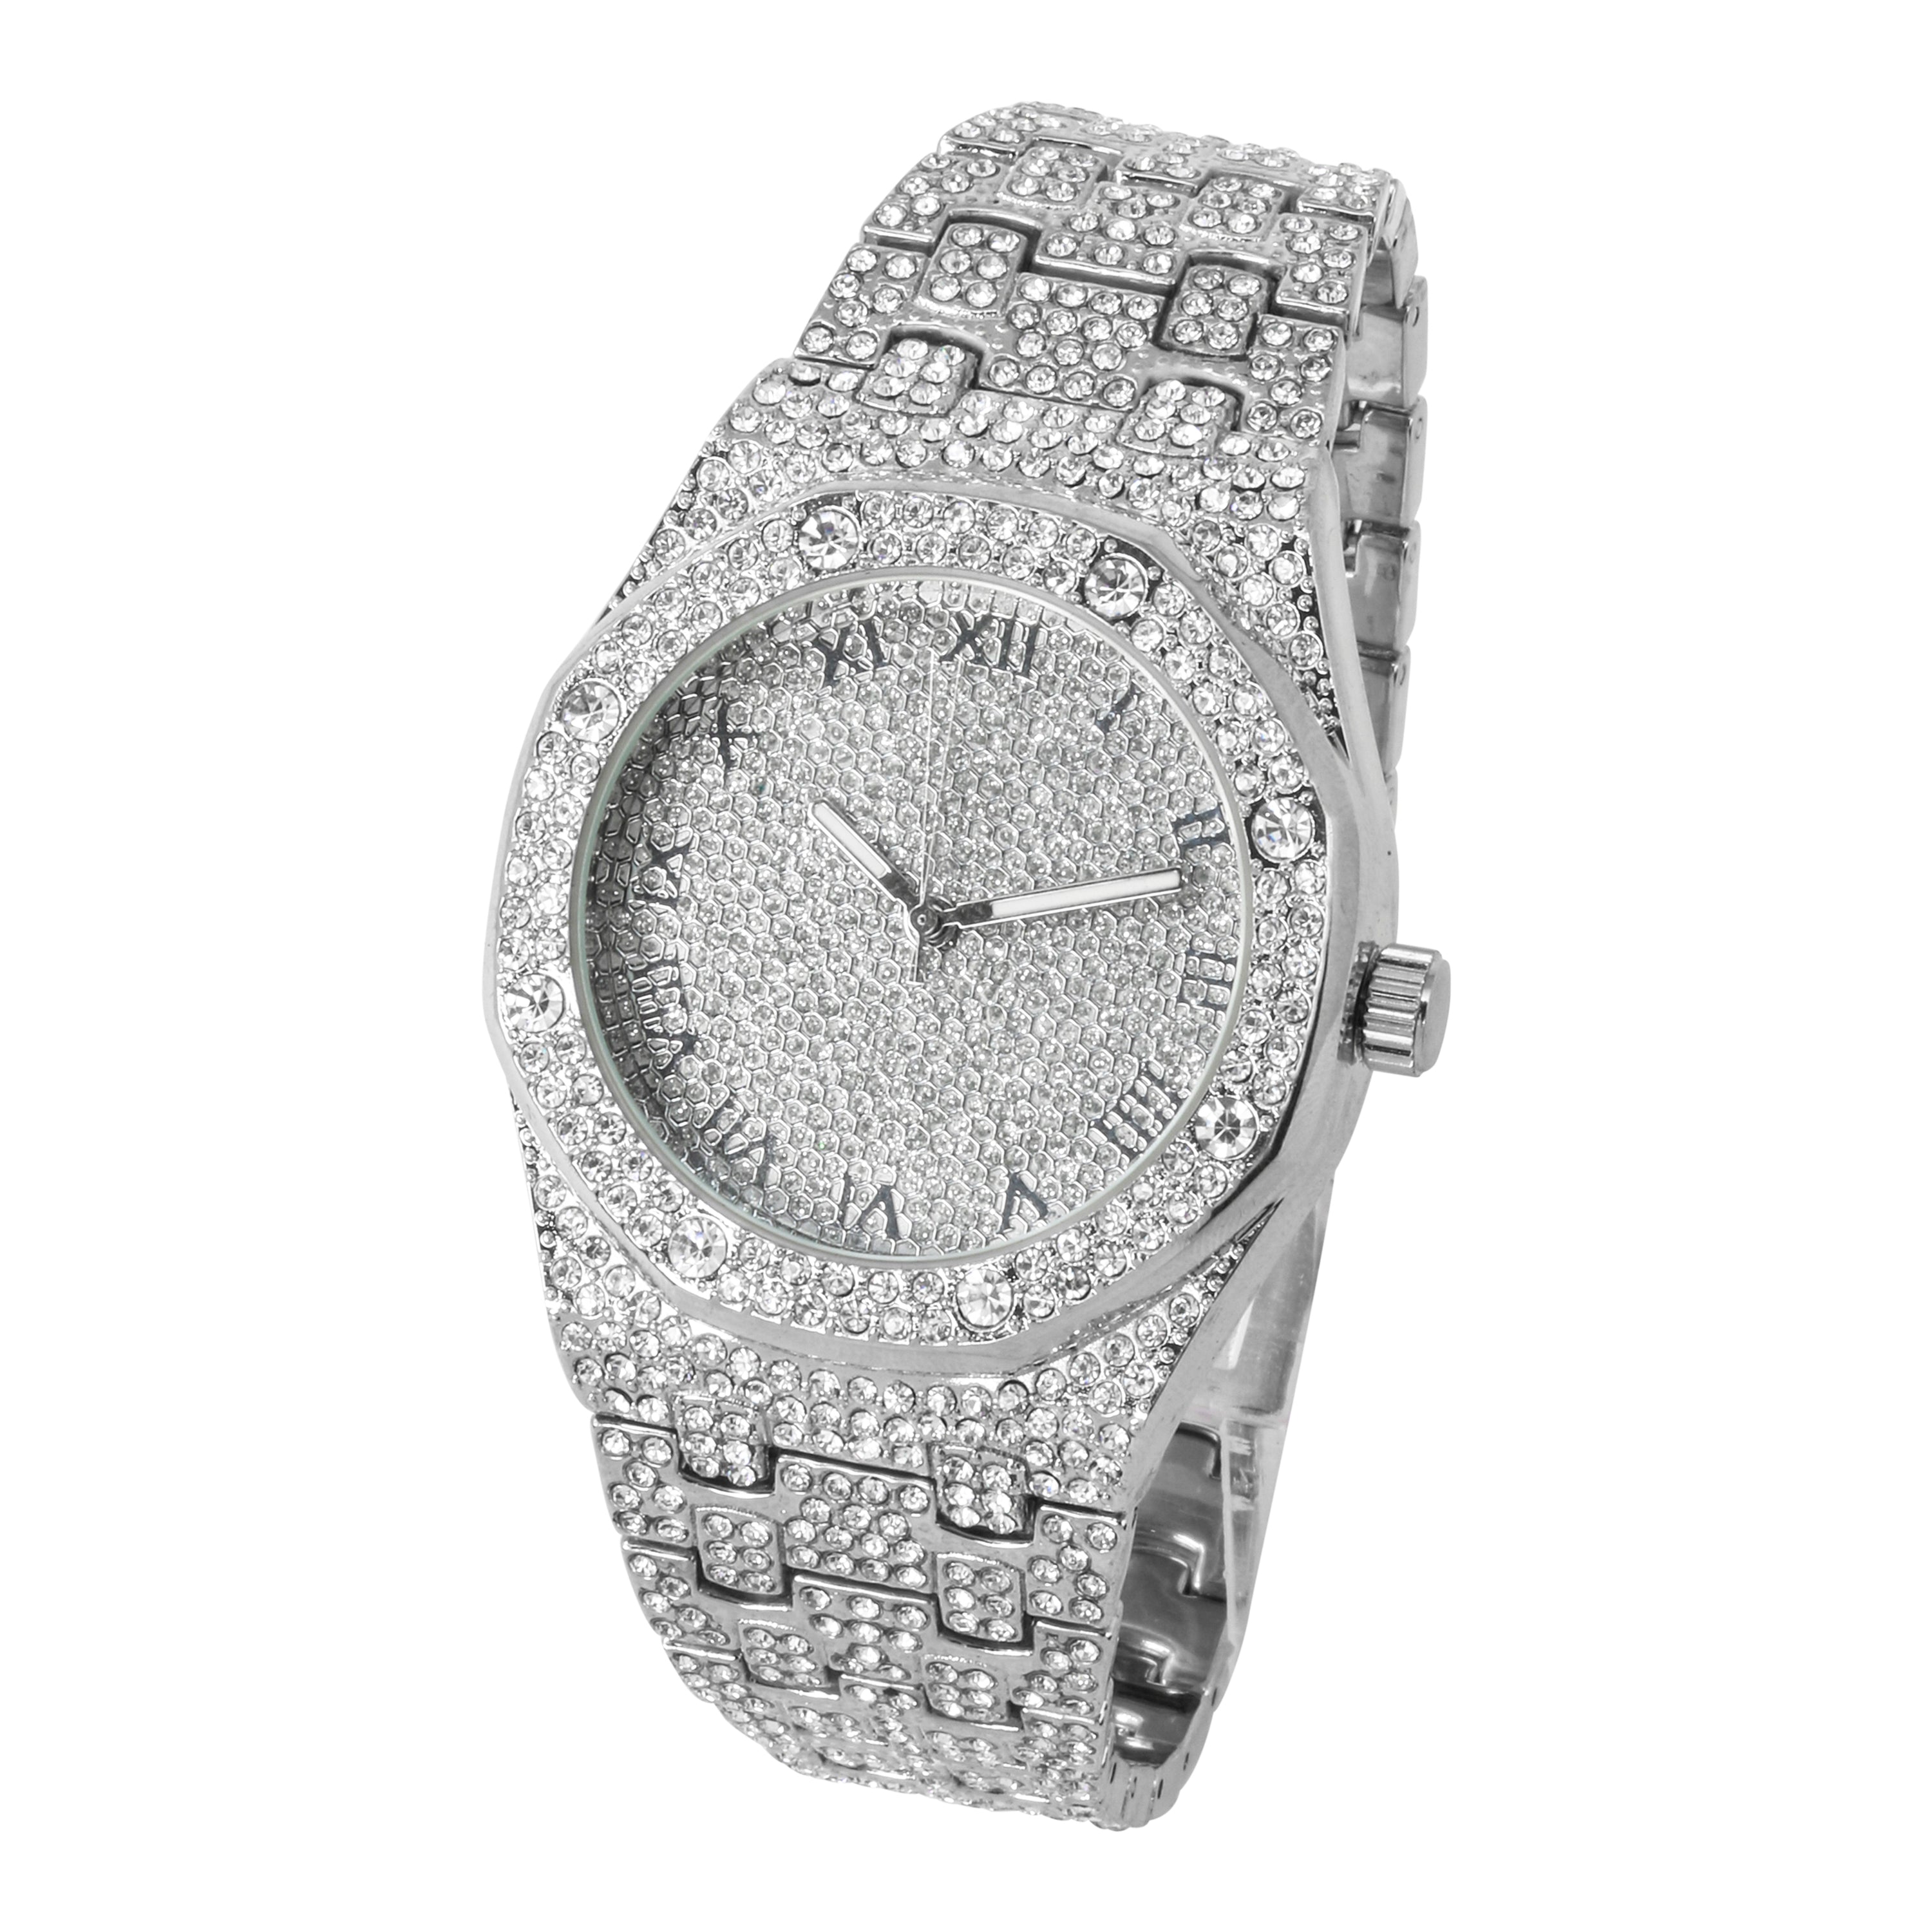 Men's 40mm Silver Octagon Bezel - "Fully Iced Out Watch"